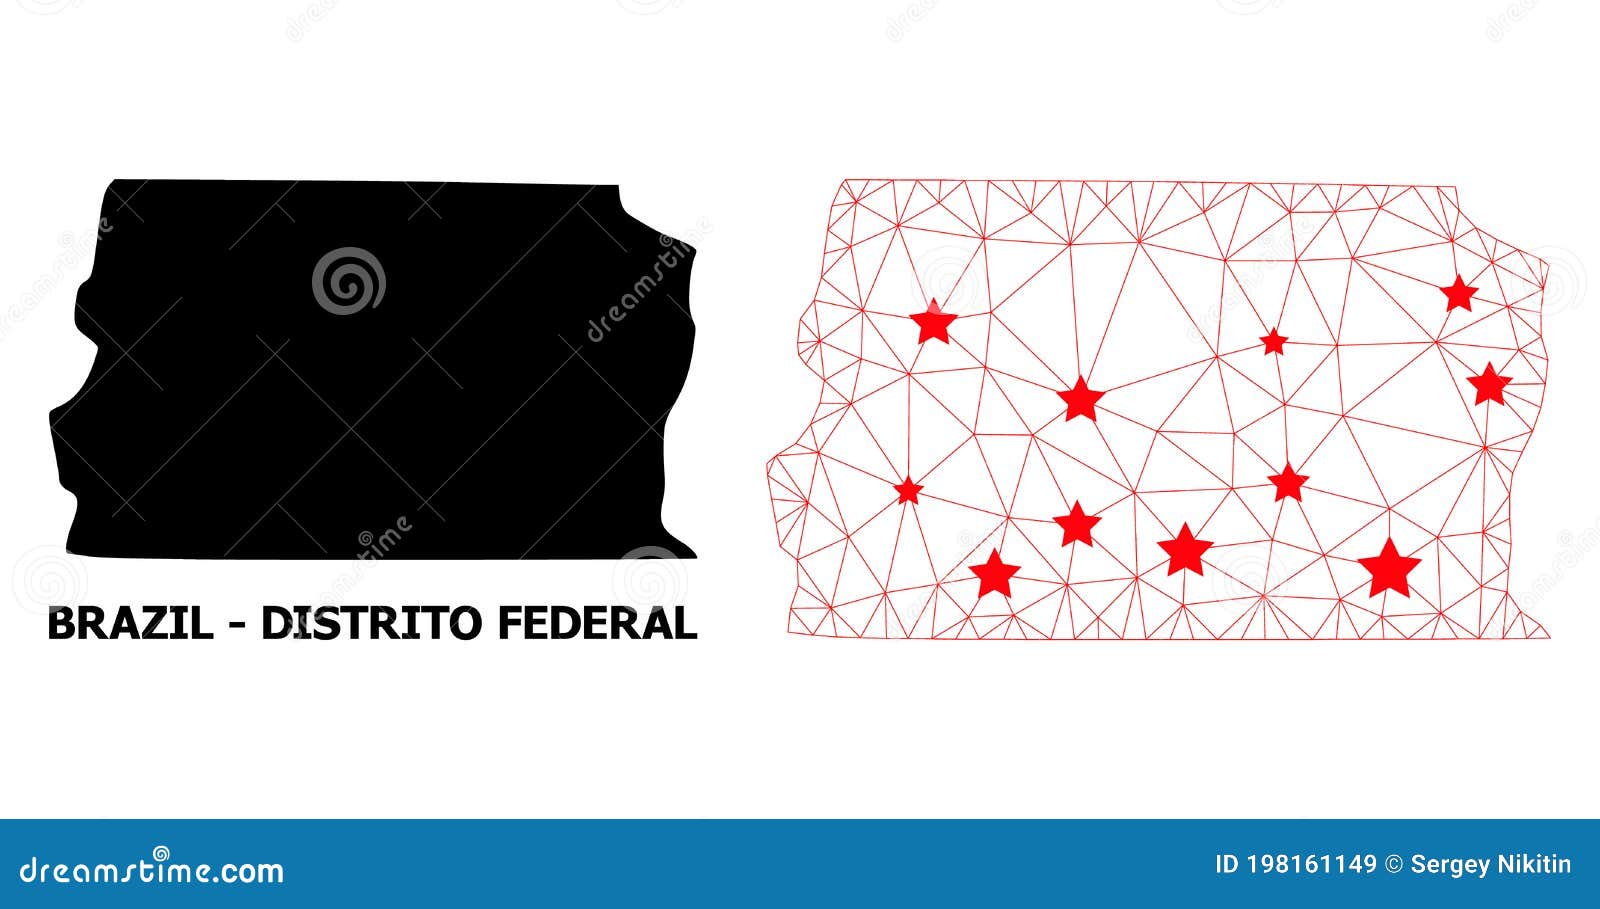 2d polygonal map of brazil - distrito federal with red stars